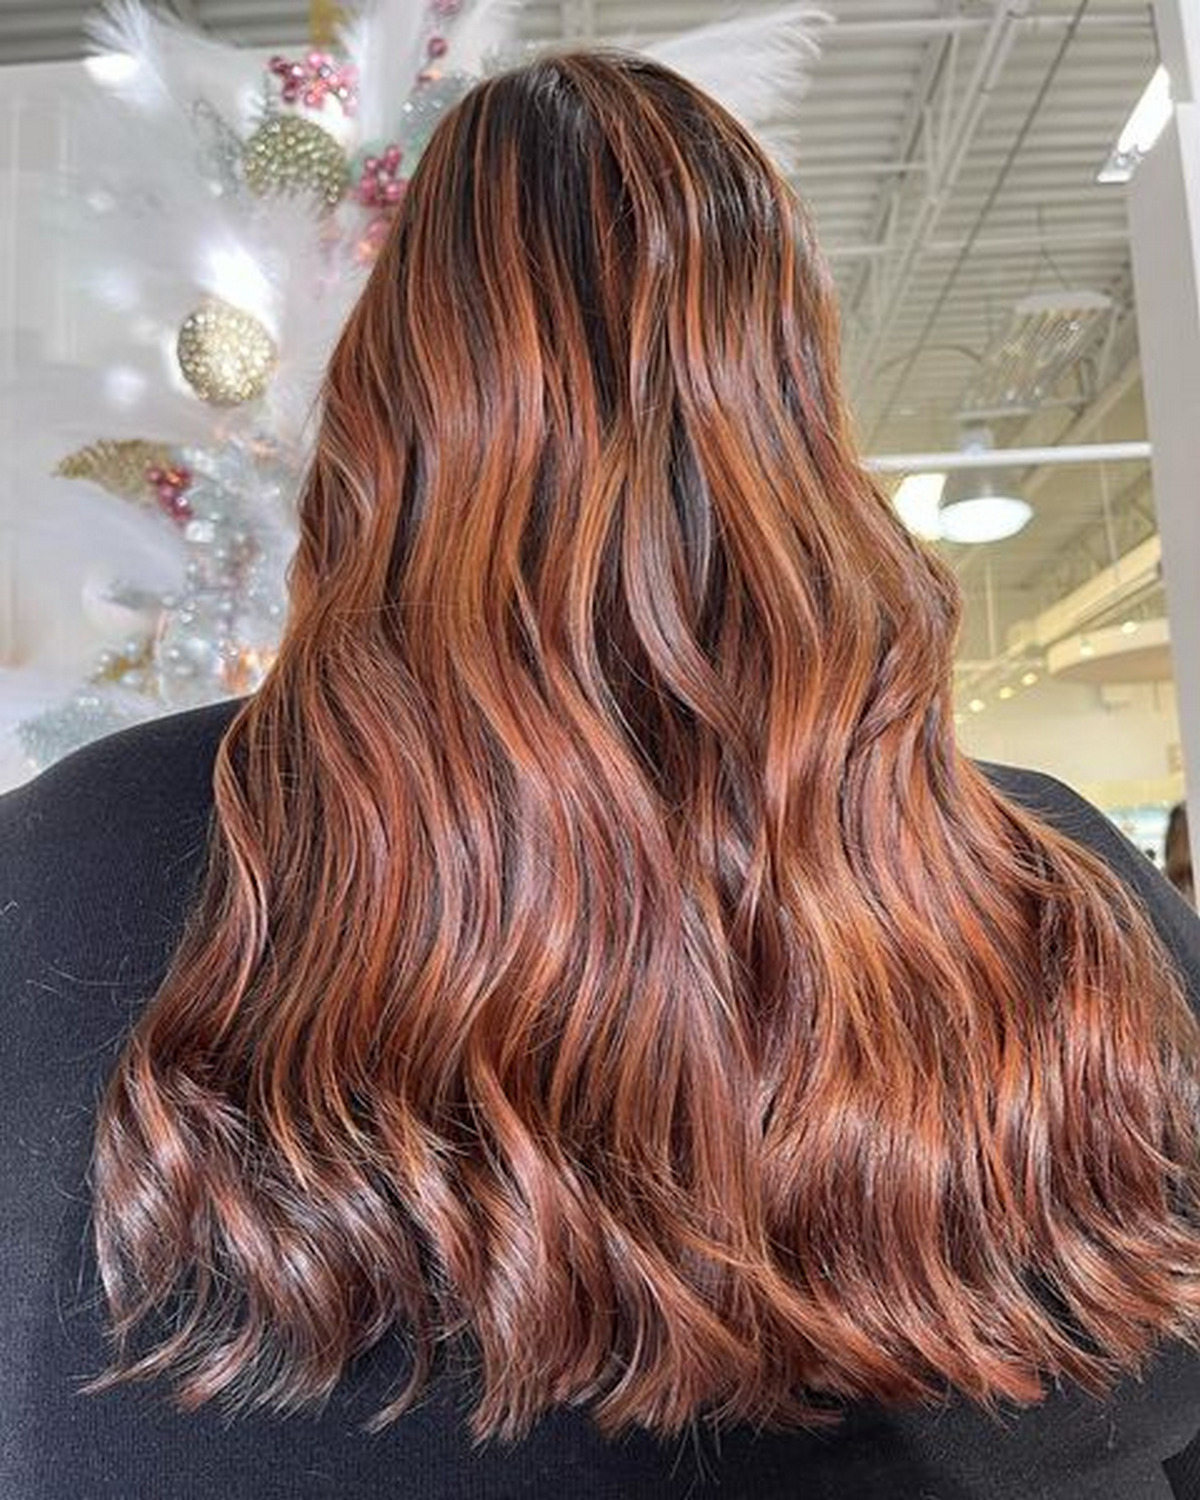 Long Chestnut Hair With Sparkles Of Red